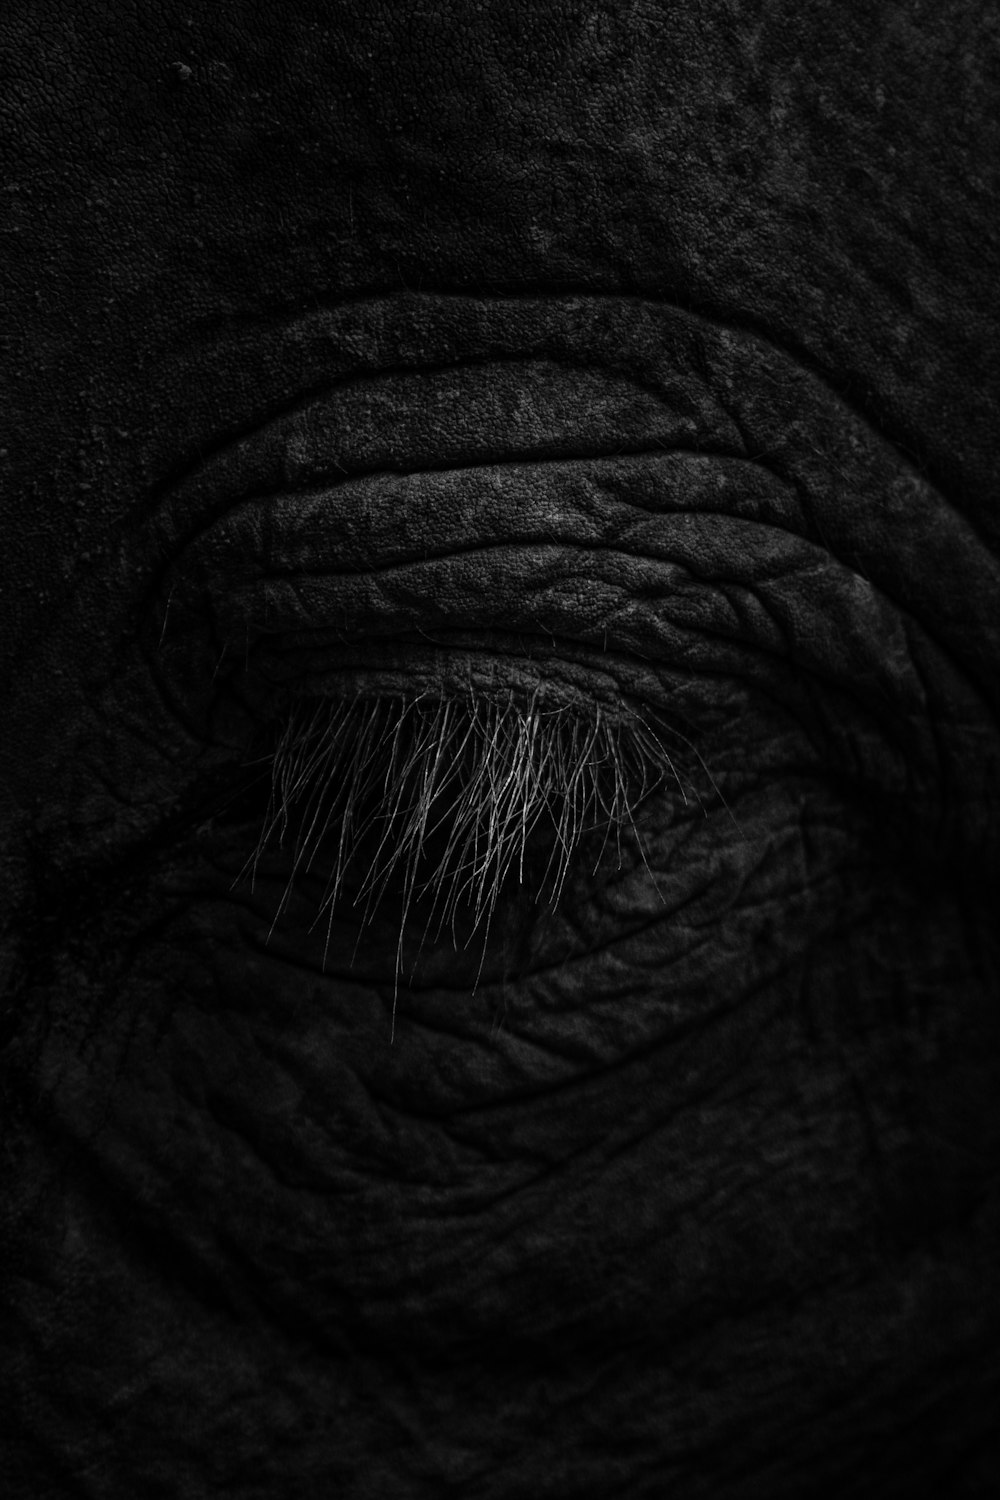 a close up of an elephant's eye in black and white